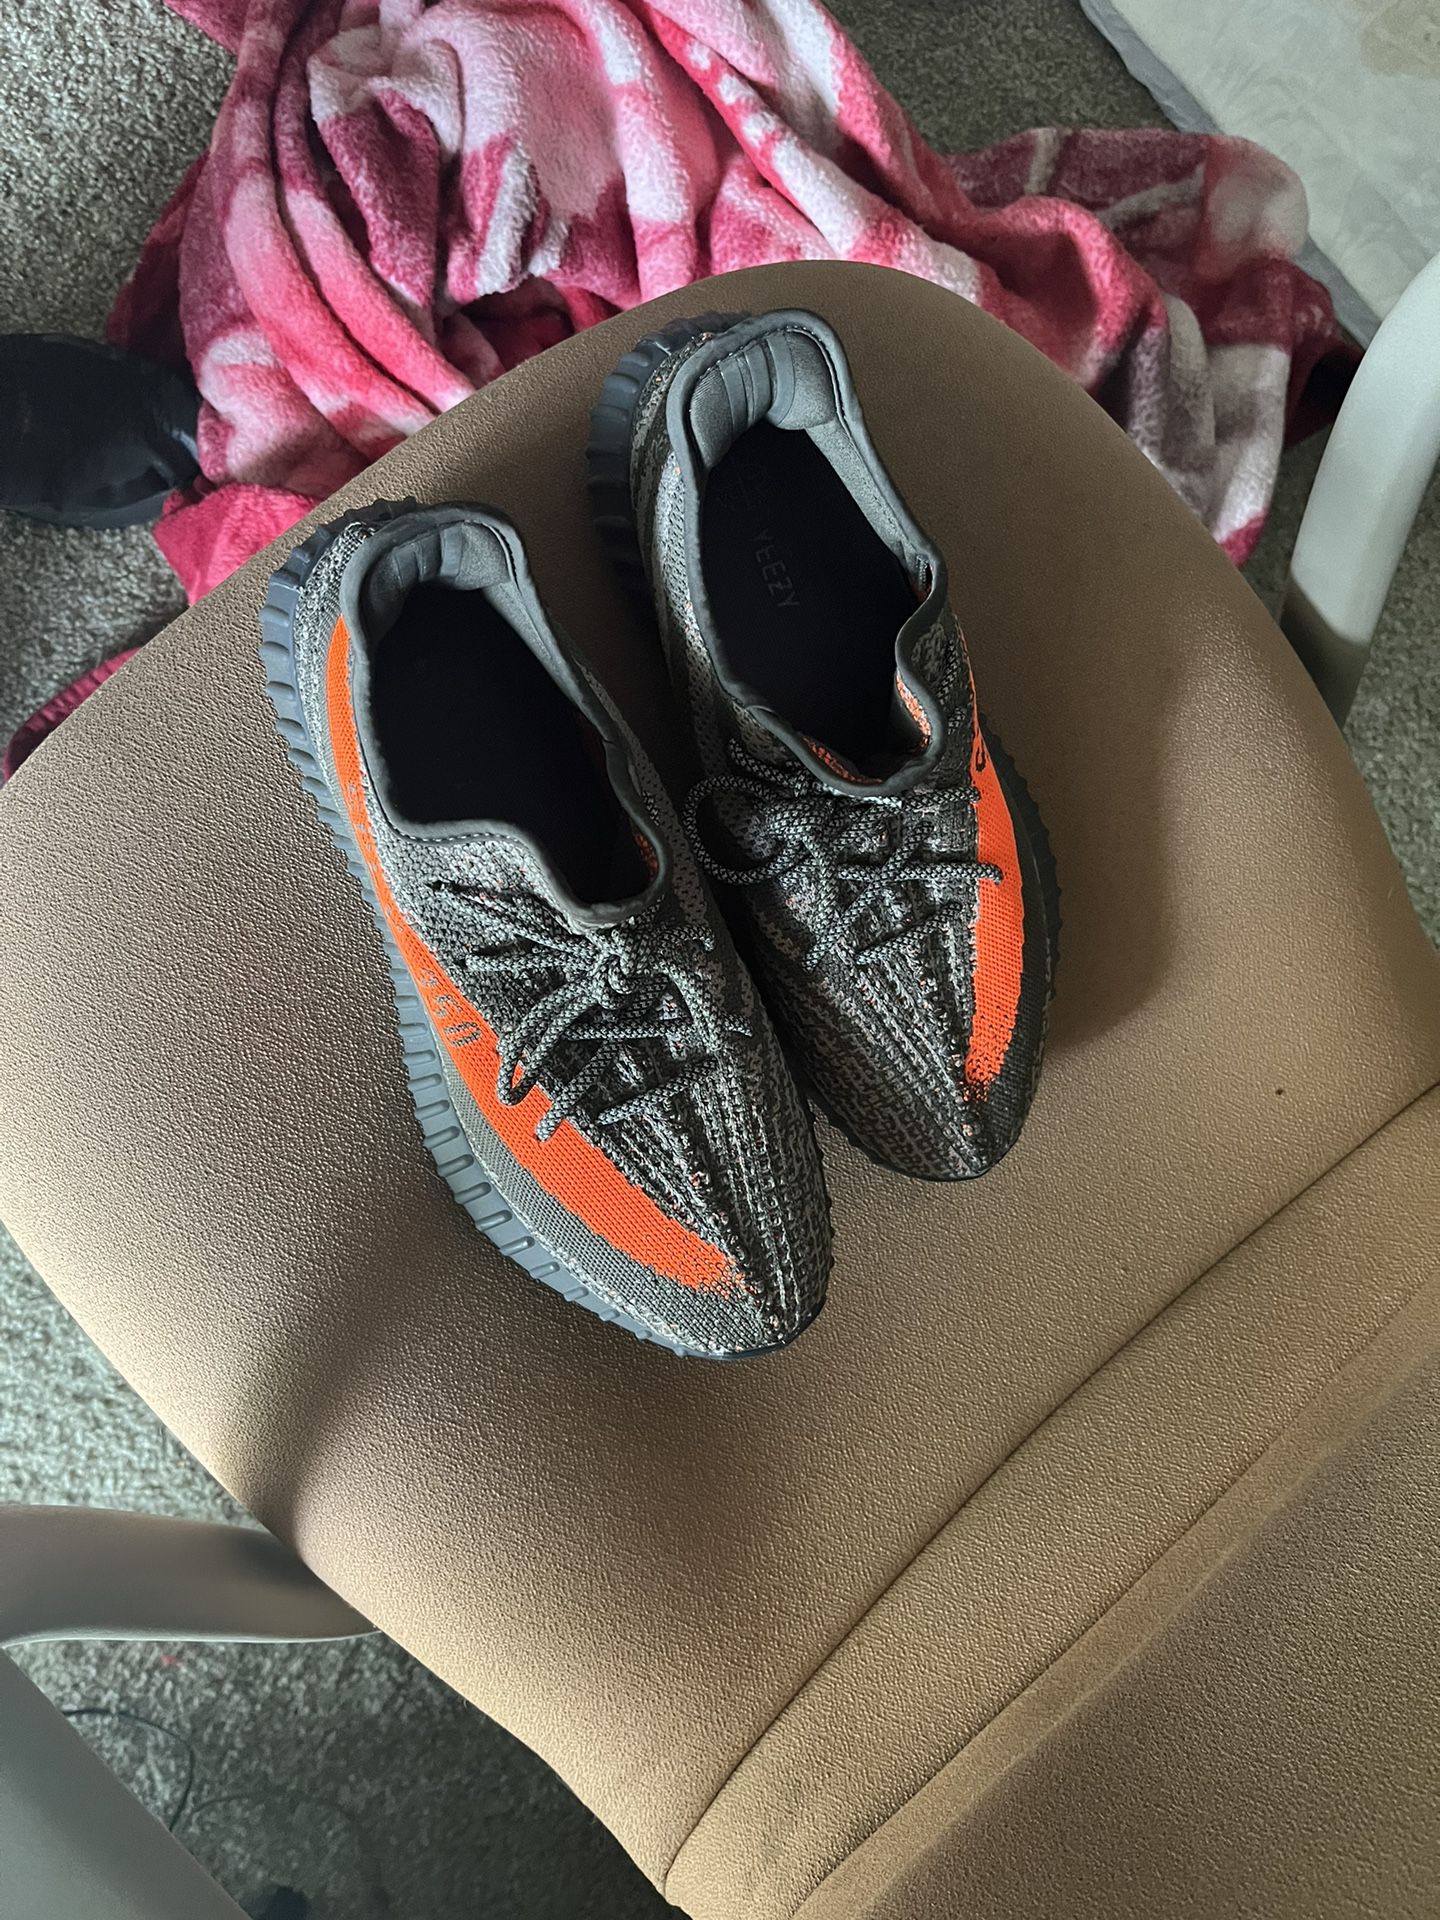 Yeezy 350 Only Warm Once